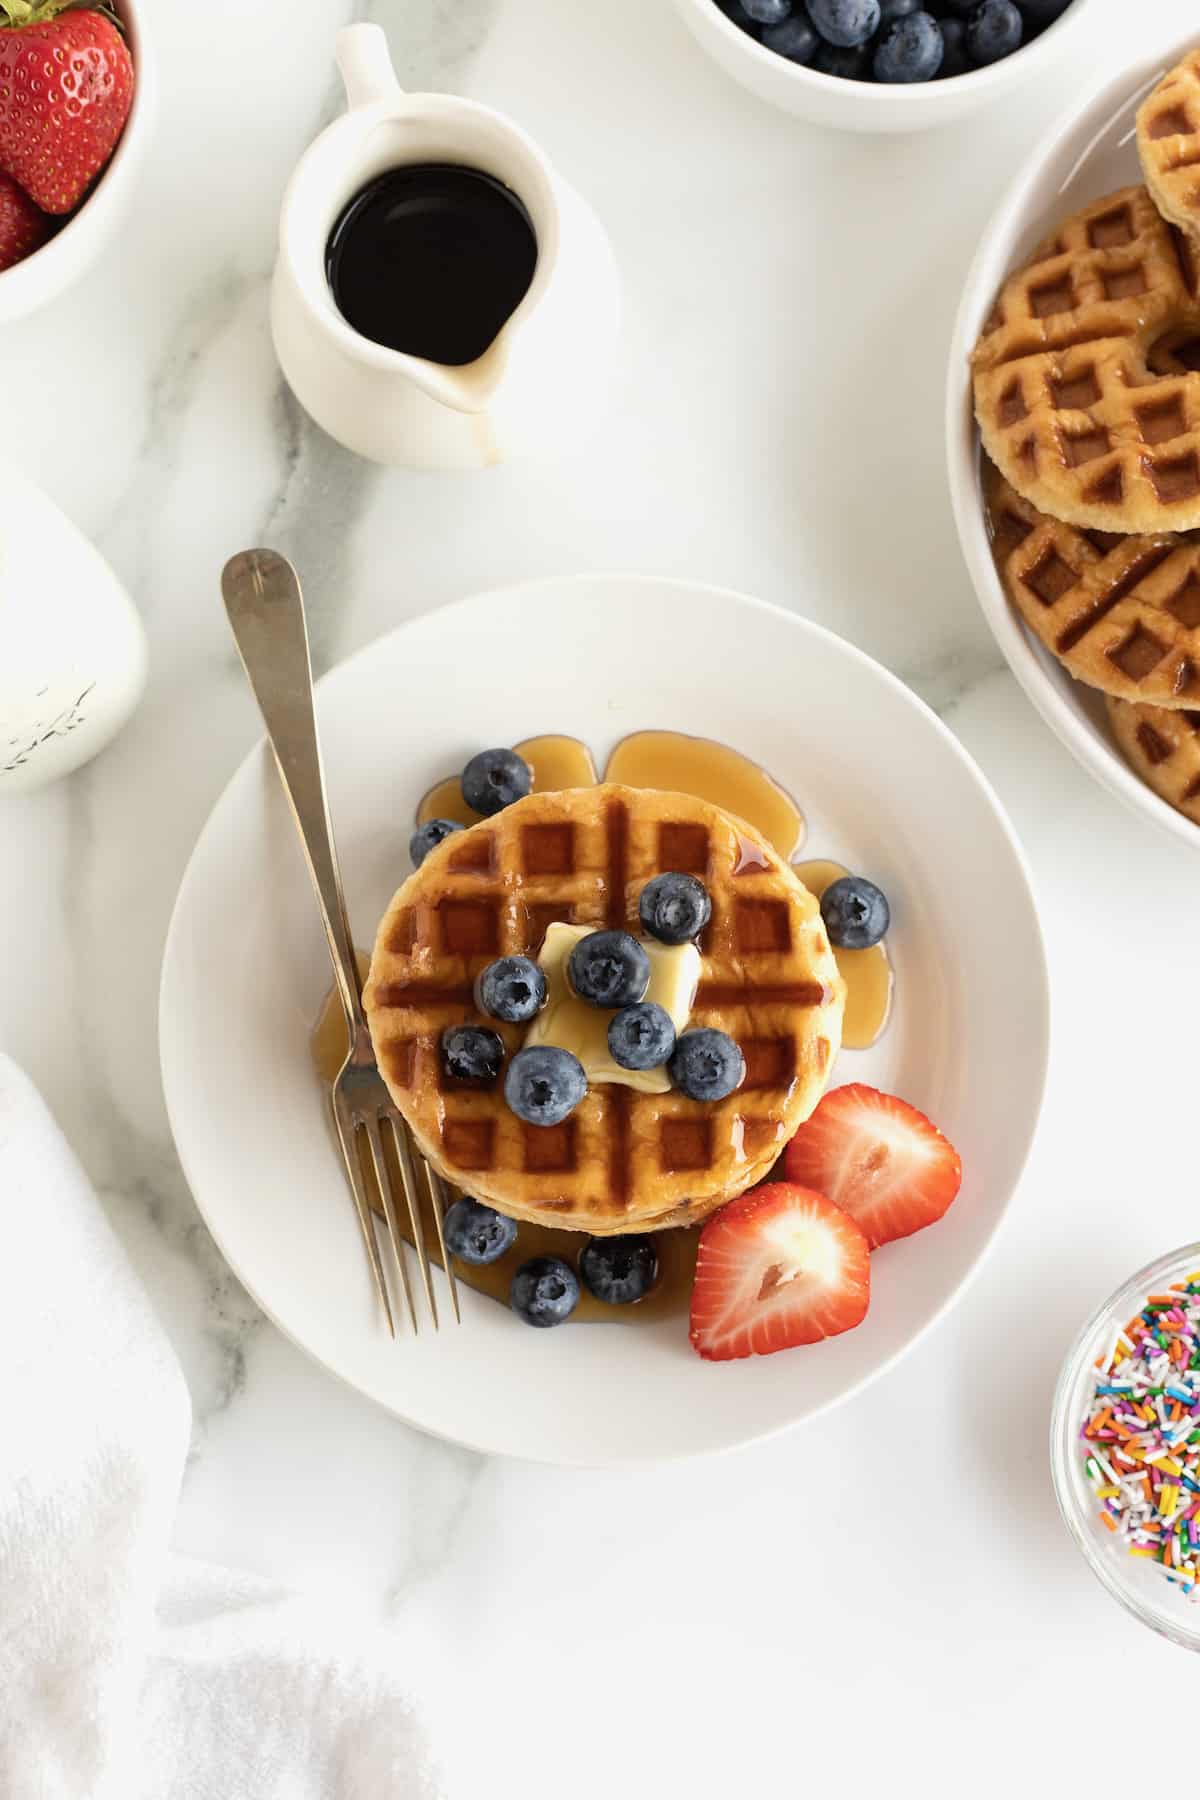 Waffles made from glazed donuts with butter, blueberries and maple syrup.